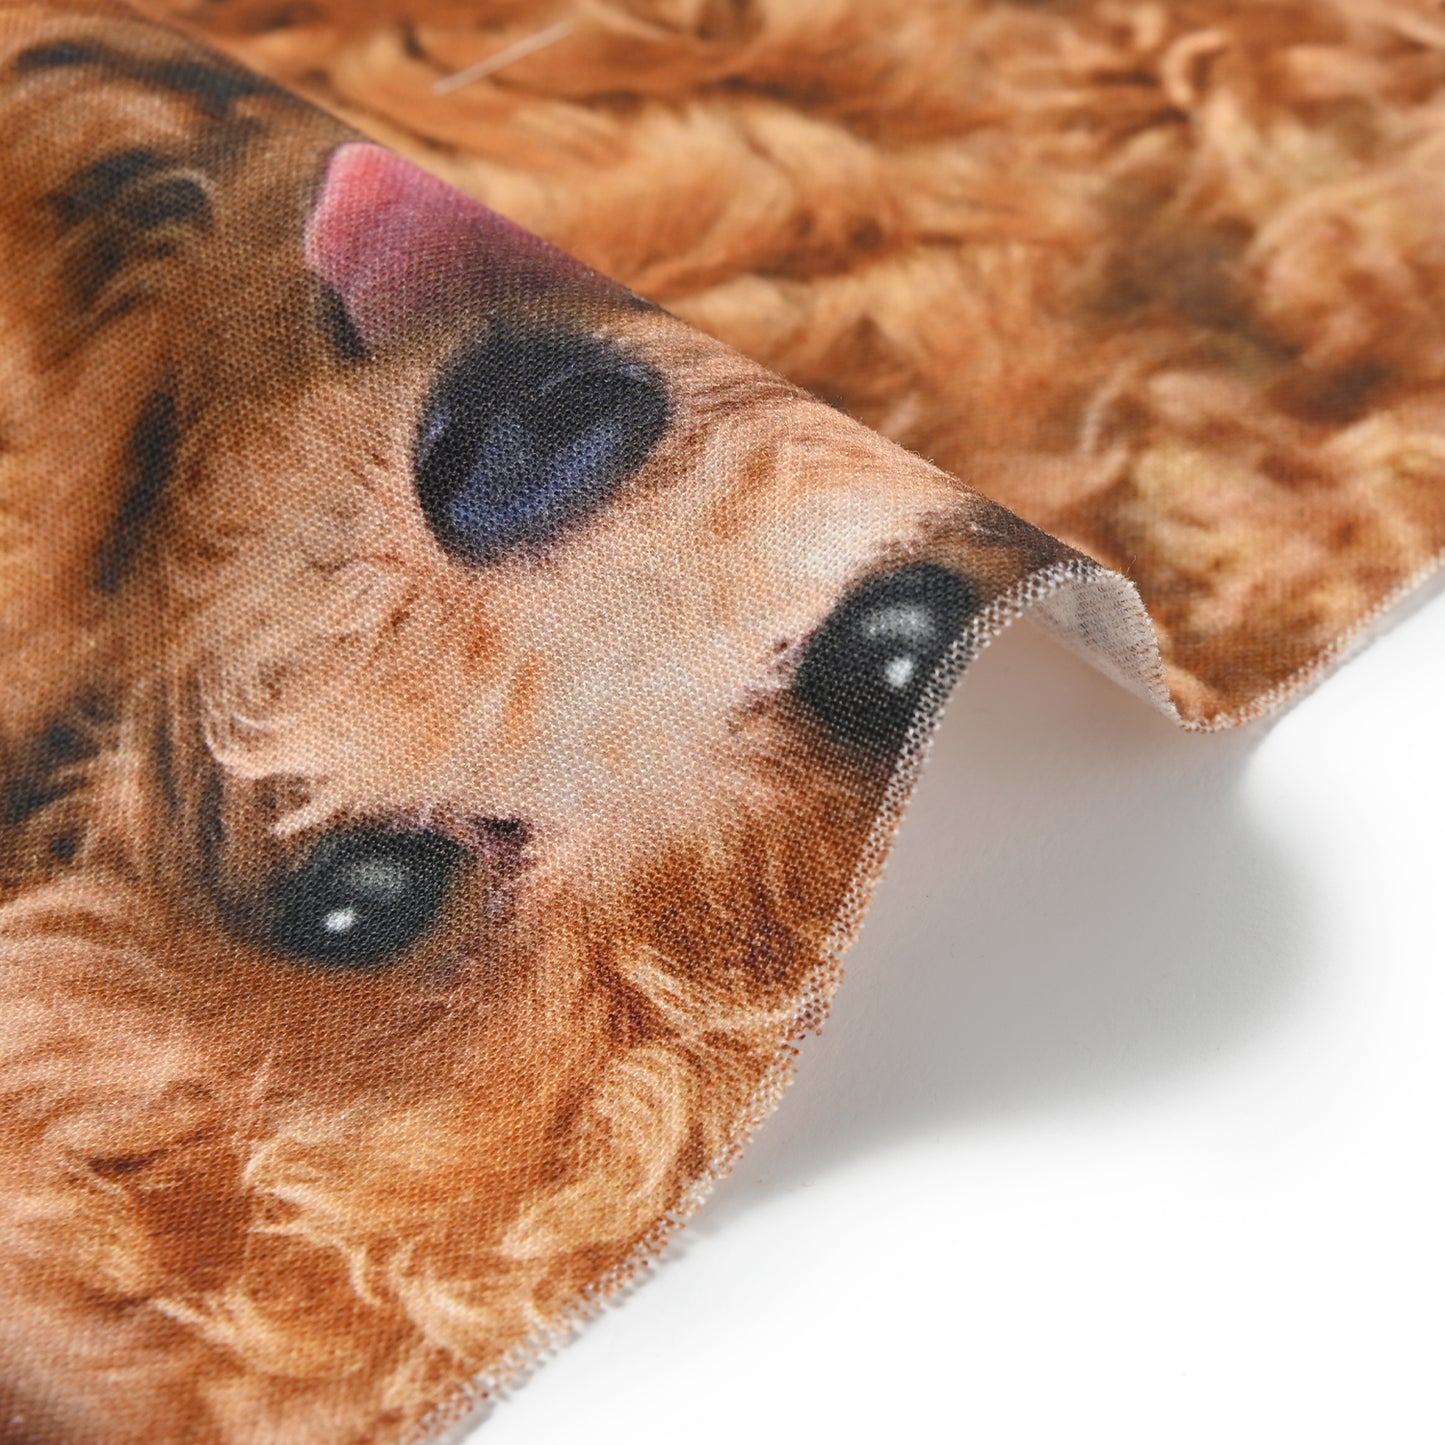 What do you make? (Poodle) Sheeting YPA-31000-1